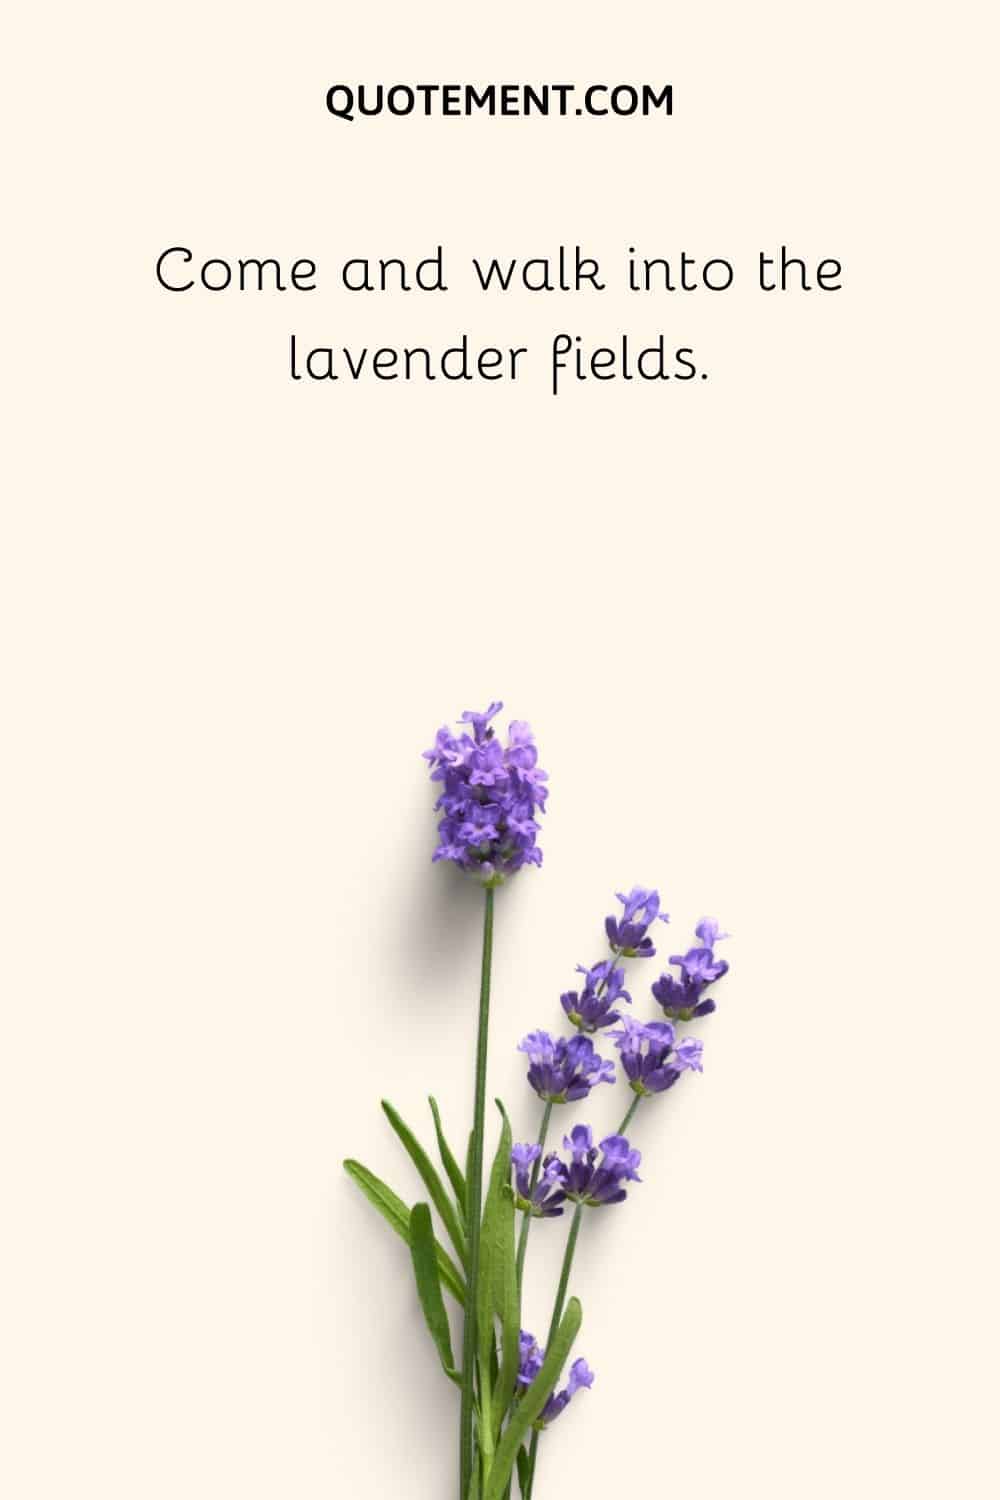 Come and walk into the lavender fields